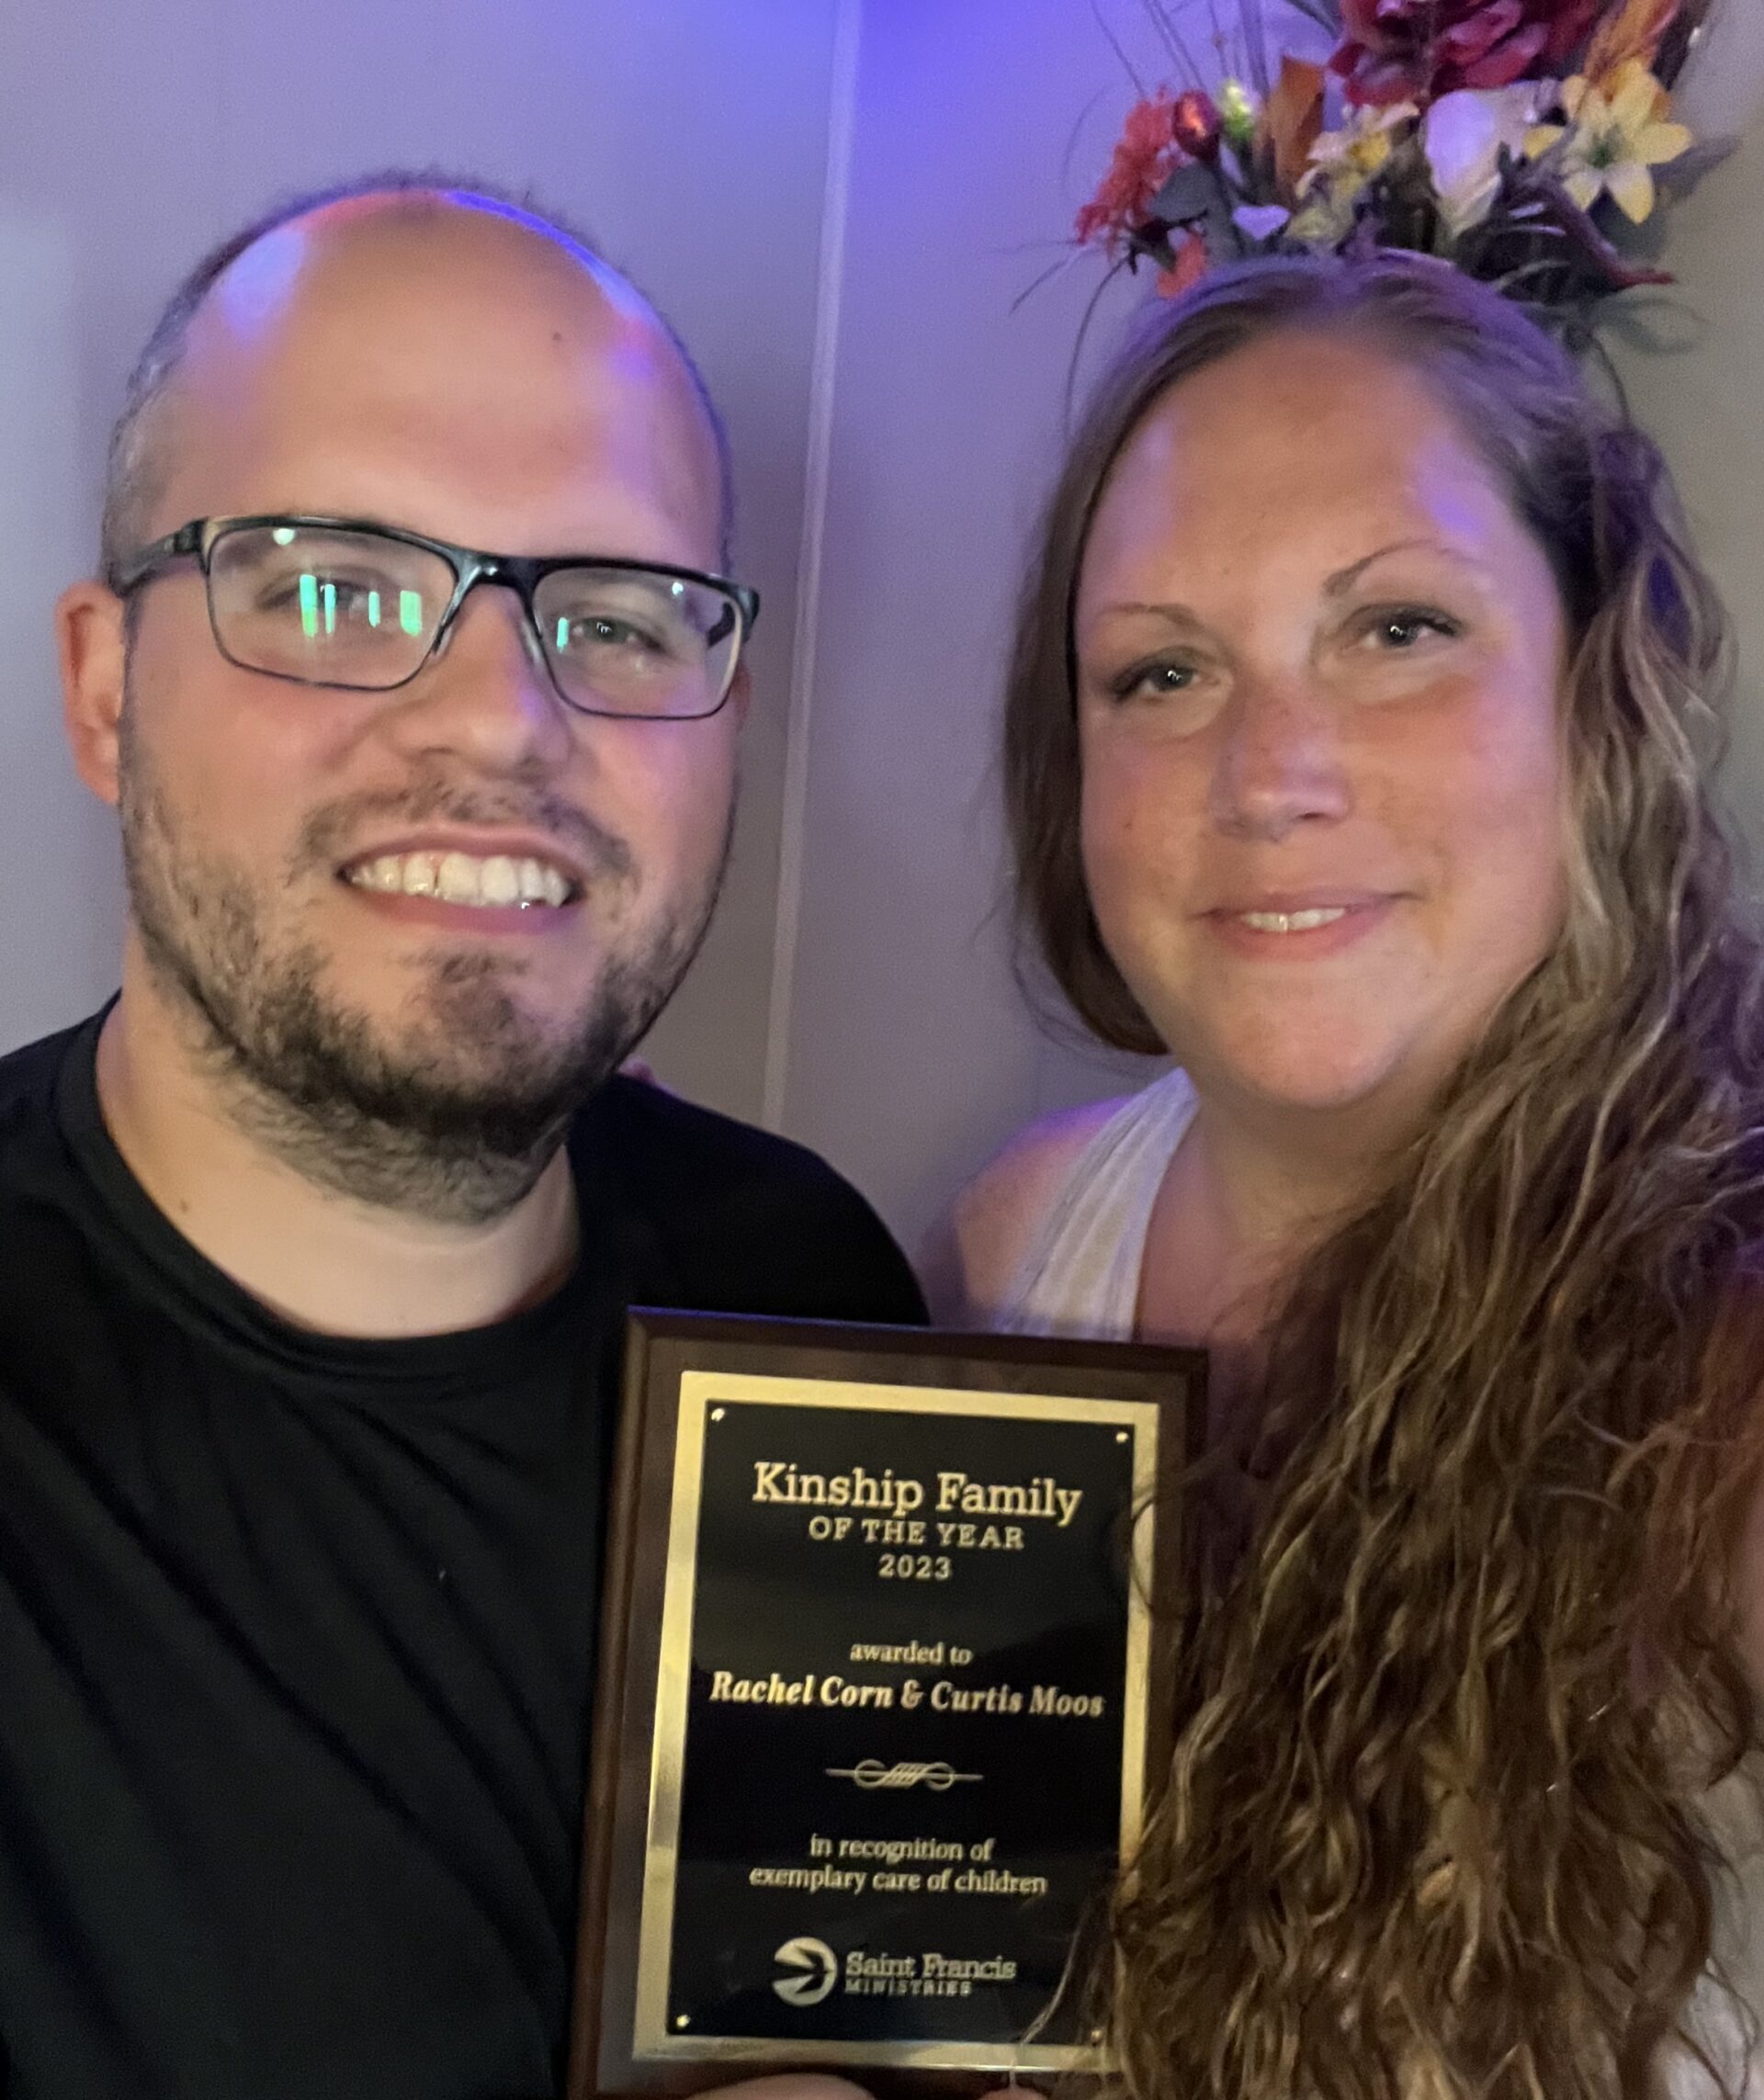 A man and a woman are smiling while holding a plaque that reads, "Kinship Family of the Year 2023 awarded to Rachel Corn & Curtis Moos in recognition of exemplary care of children." They stand in front of a flower arrangement.